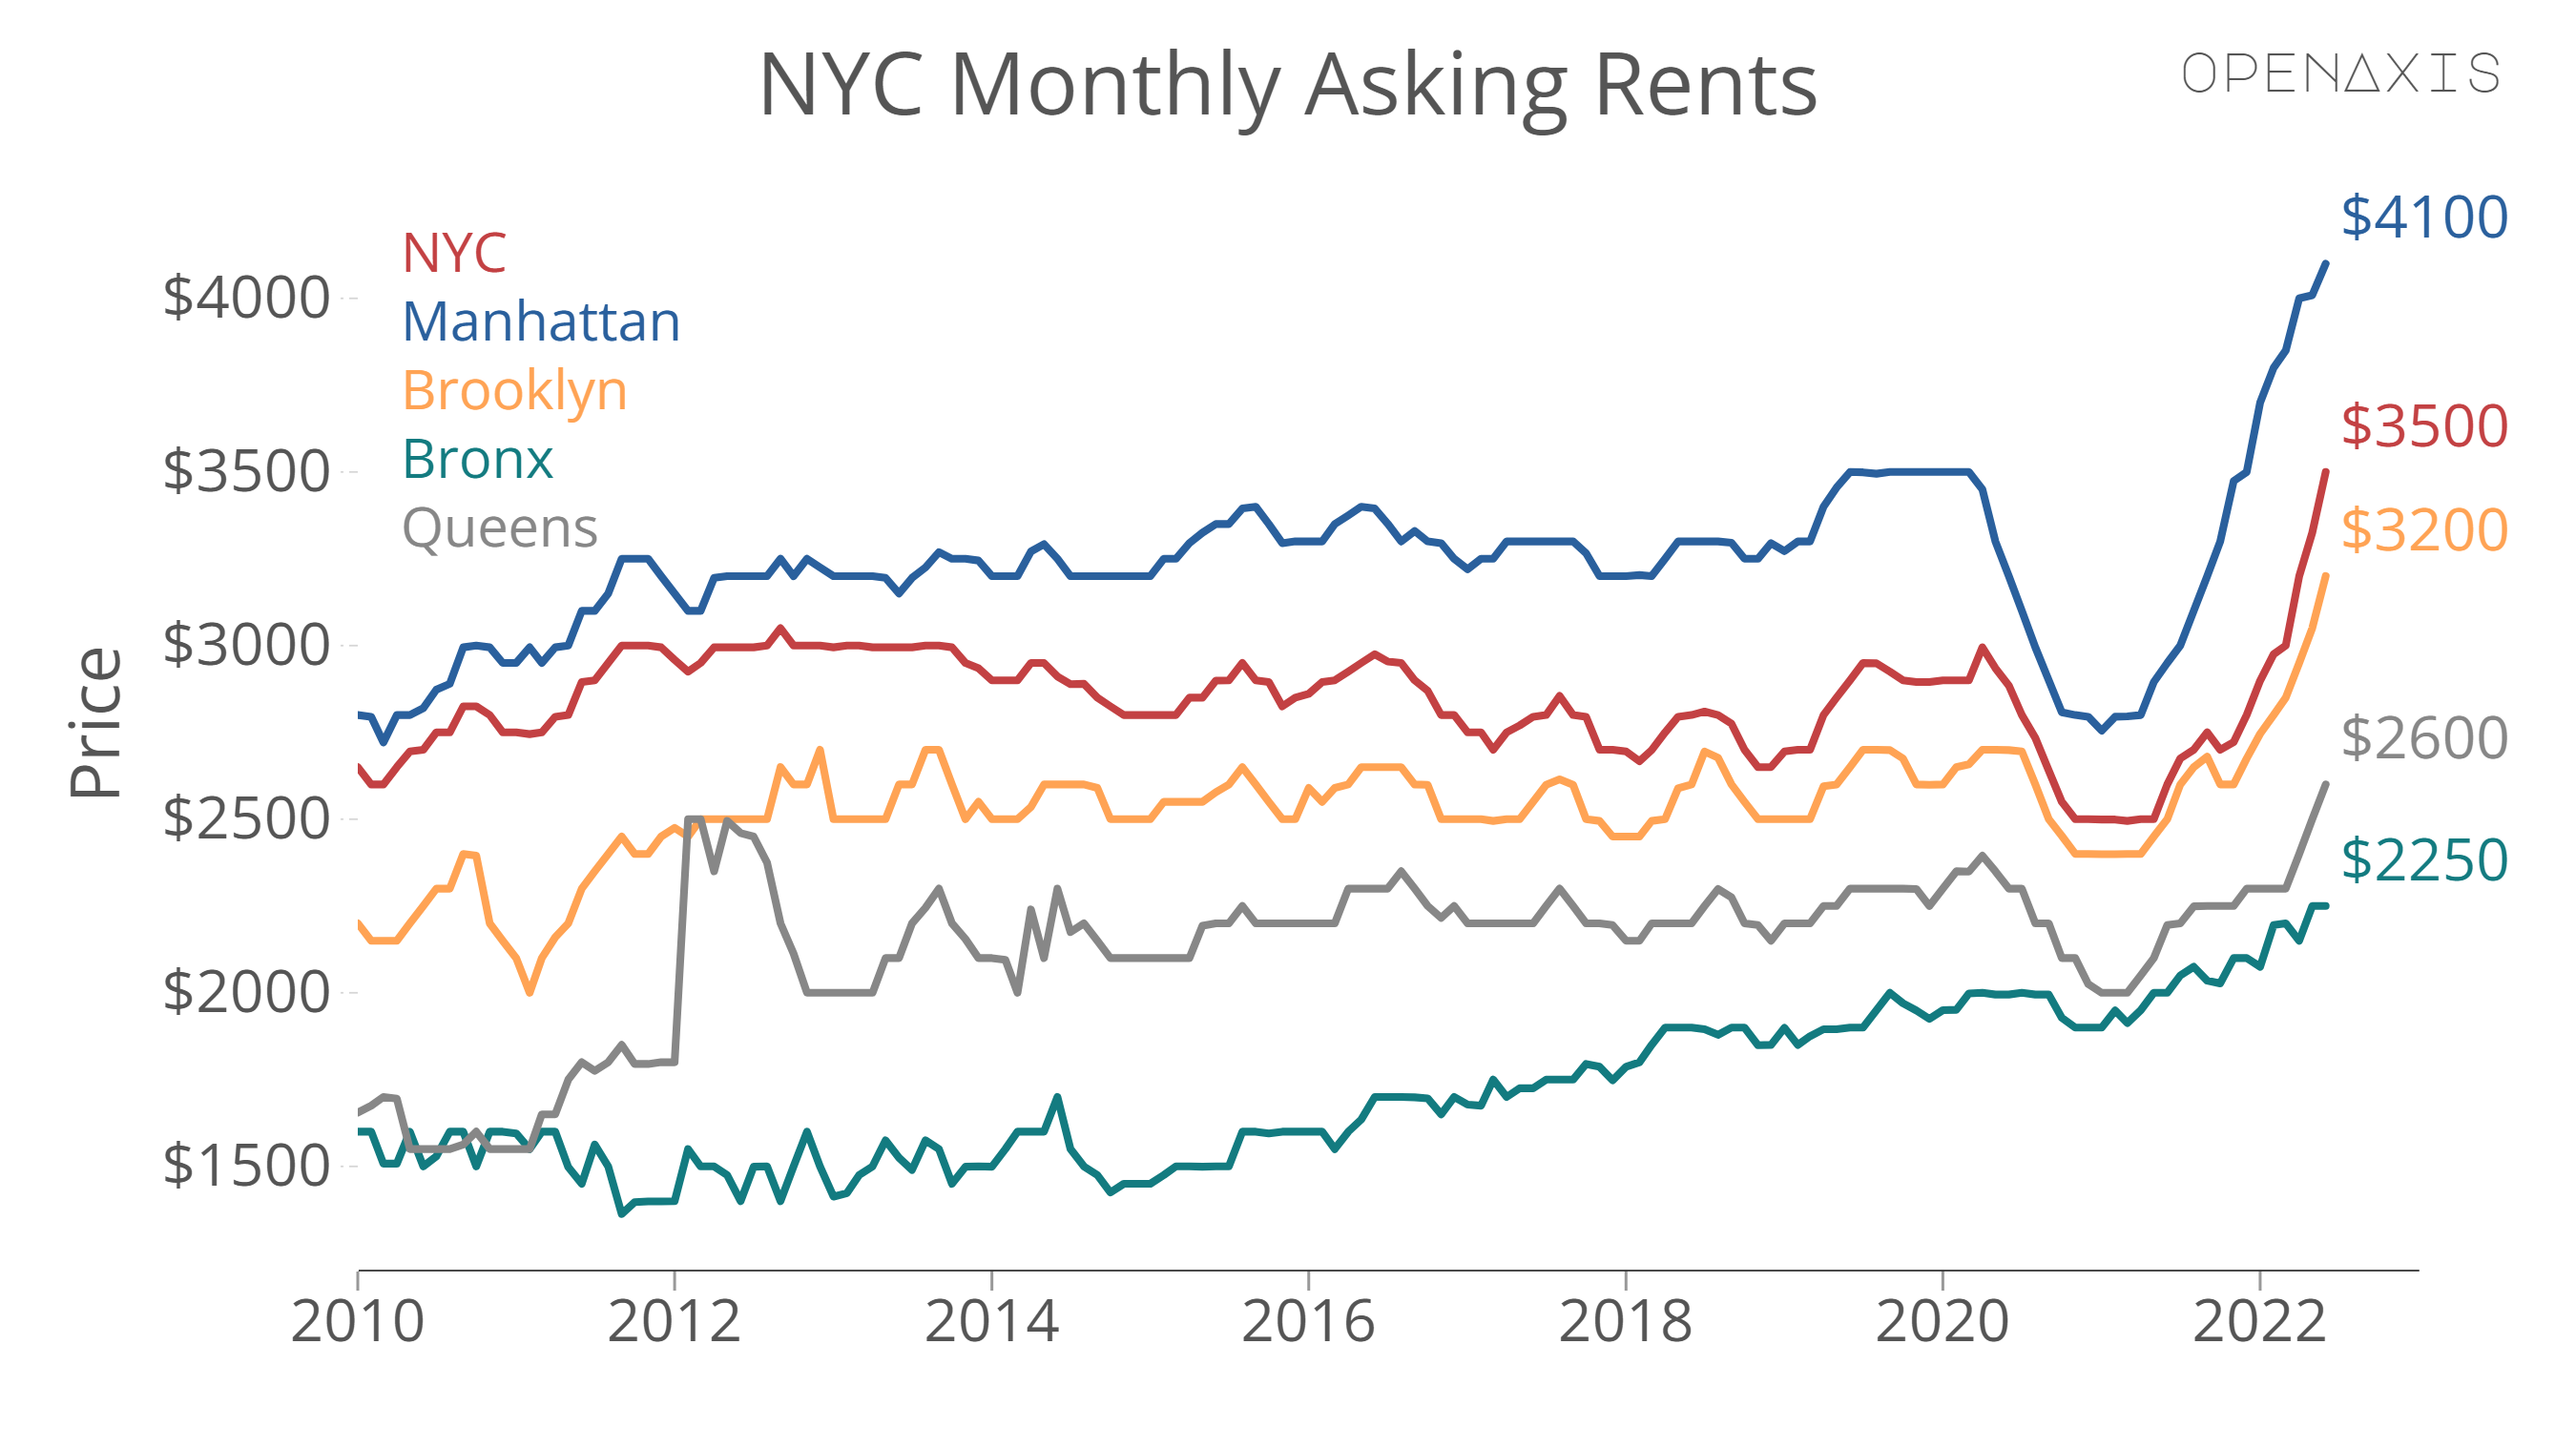 "NYC Monthly Asking Rents"